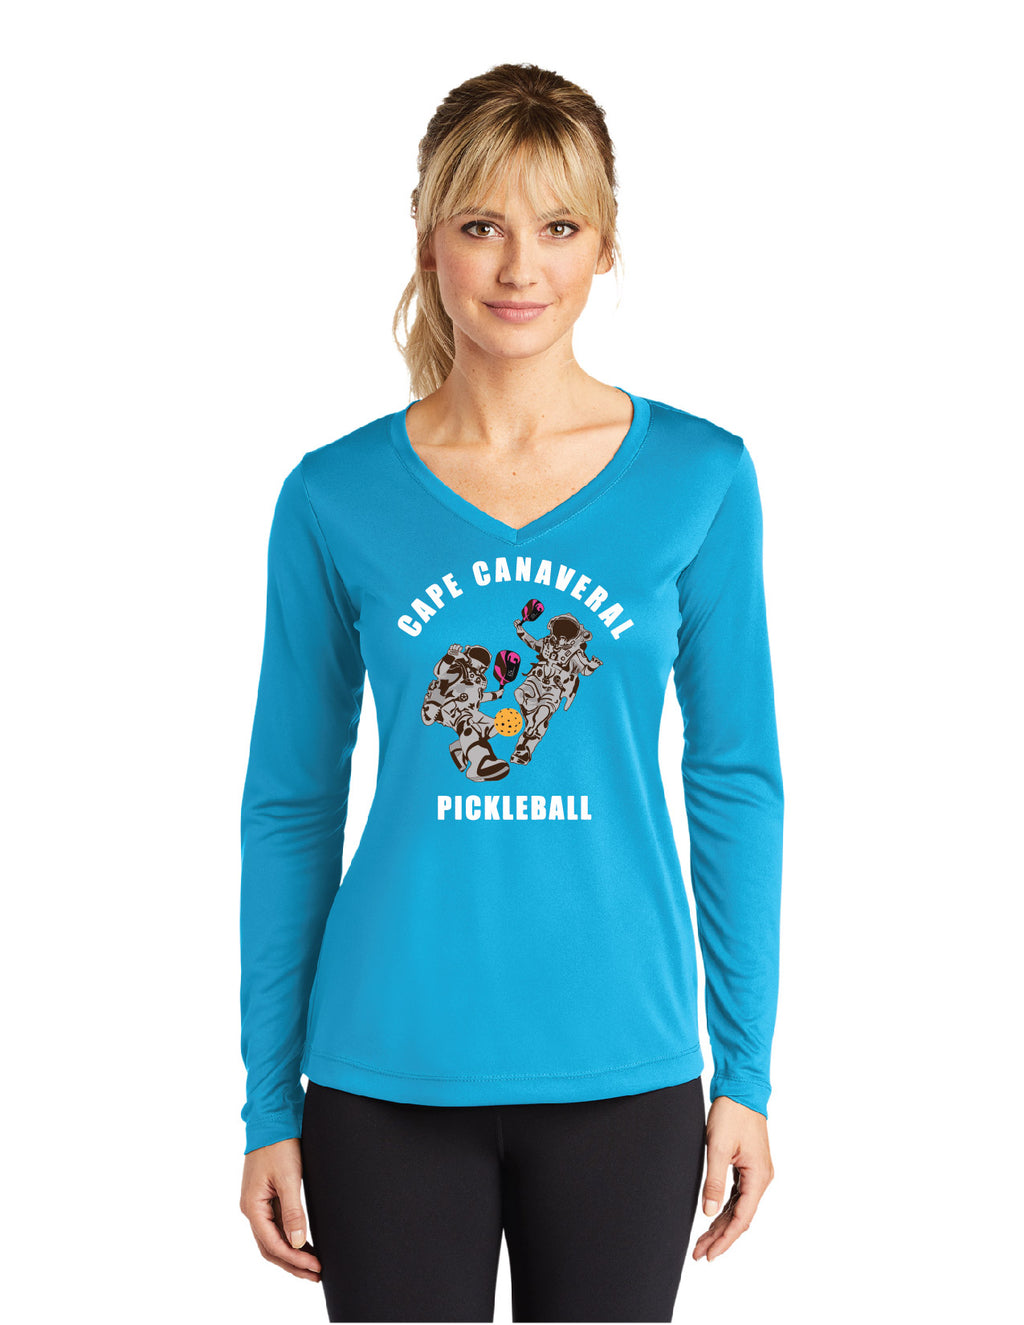 Women's Performance Long Sleeve 'Cape Canaveral' Shirt